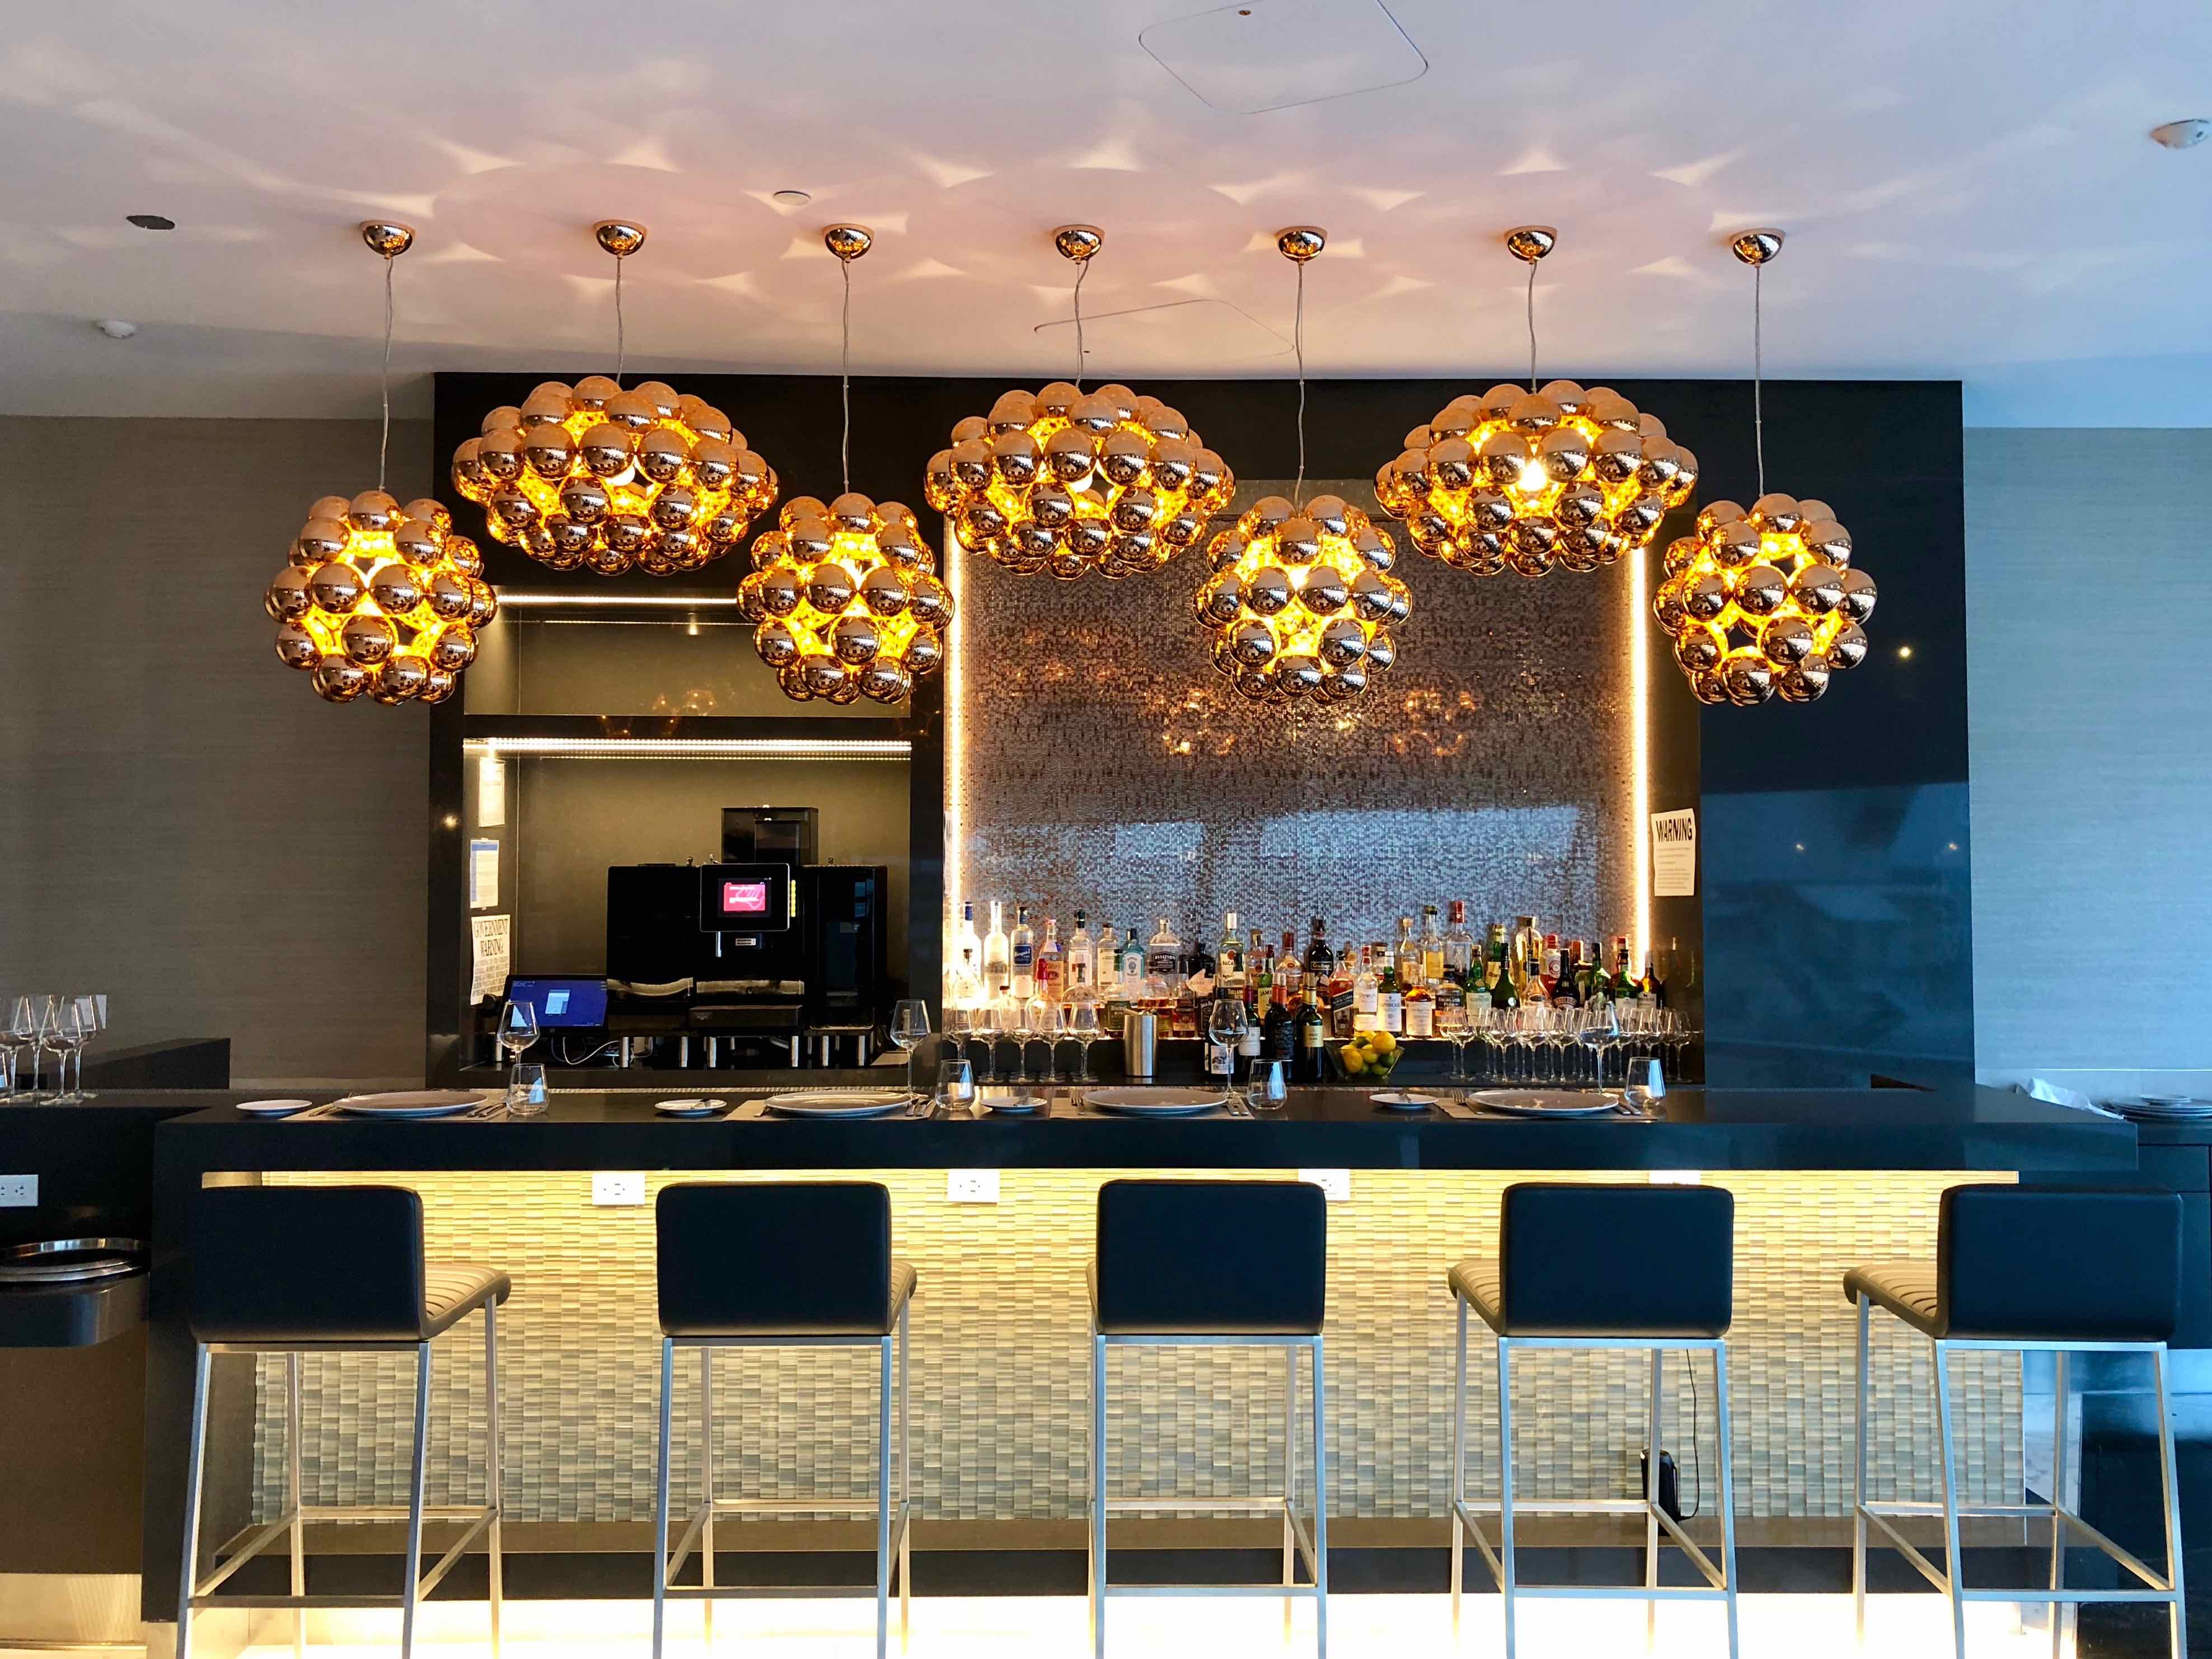 American Airlines Flagship Lounge Miami - Flagship First dining